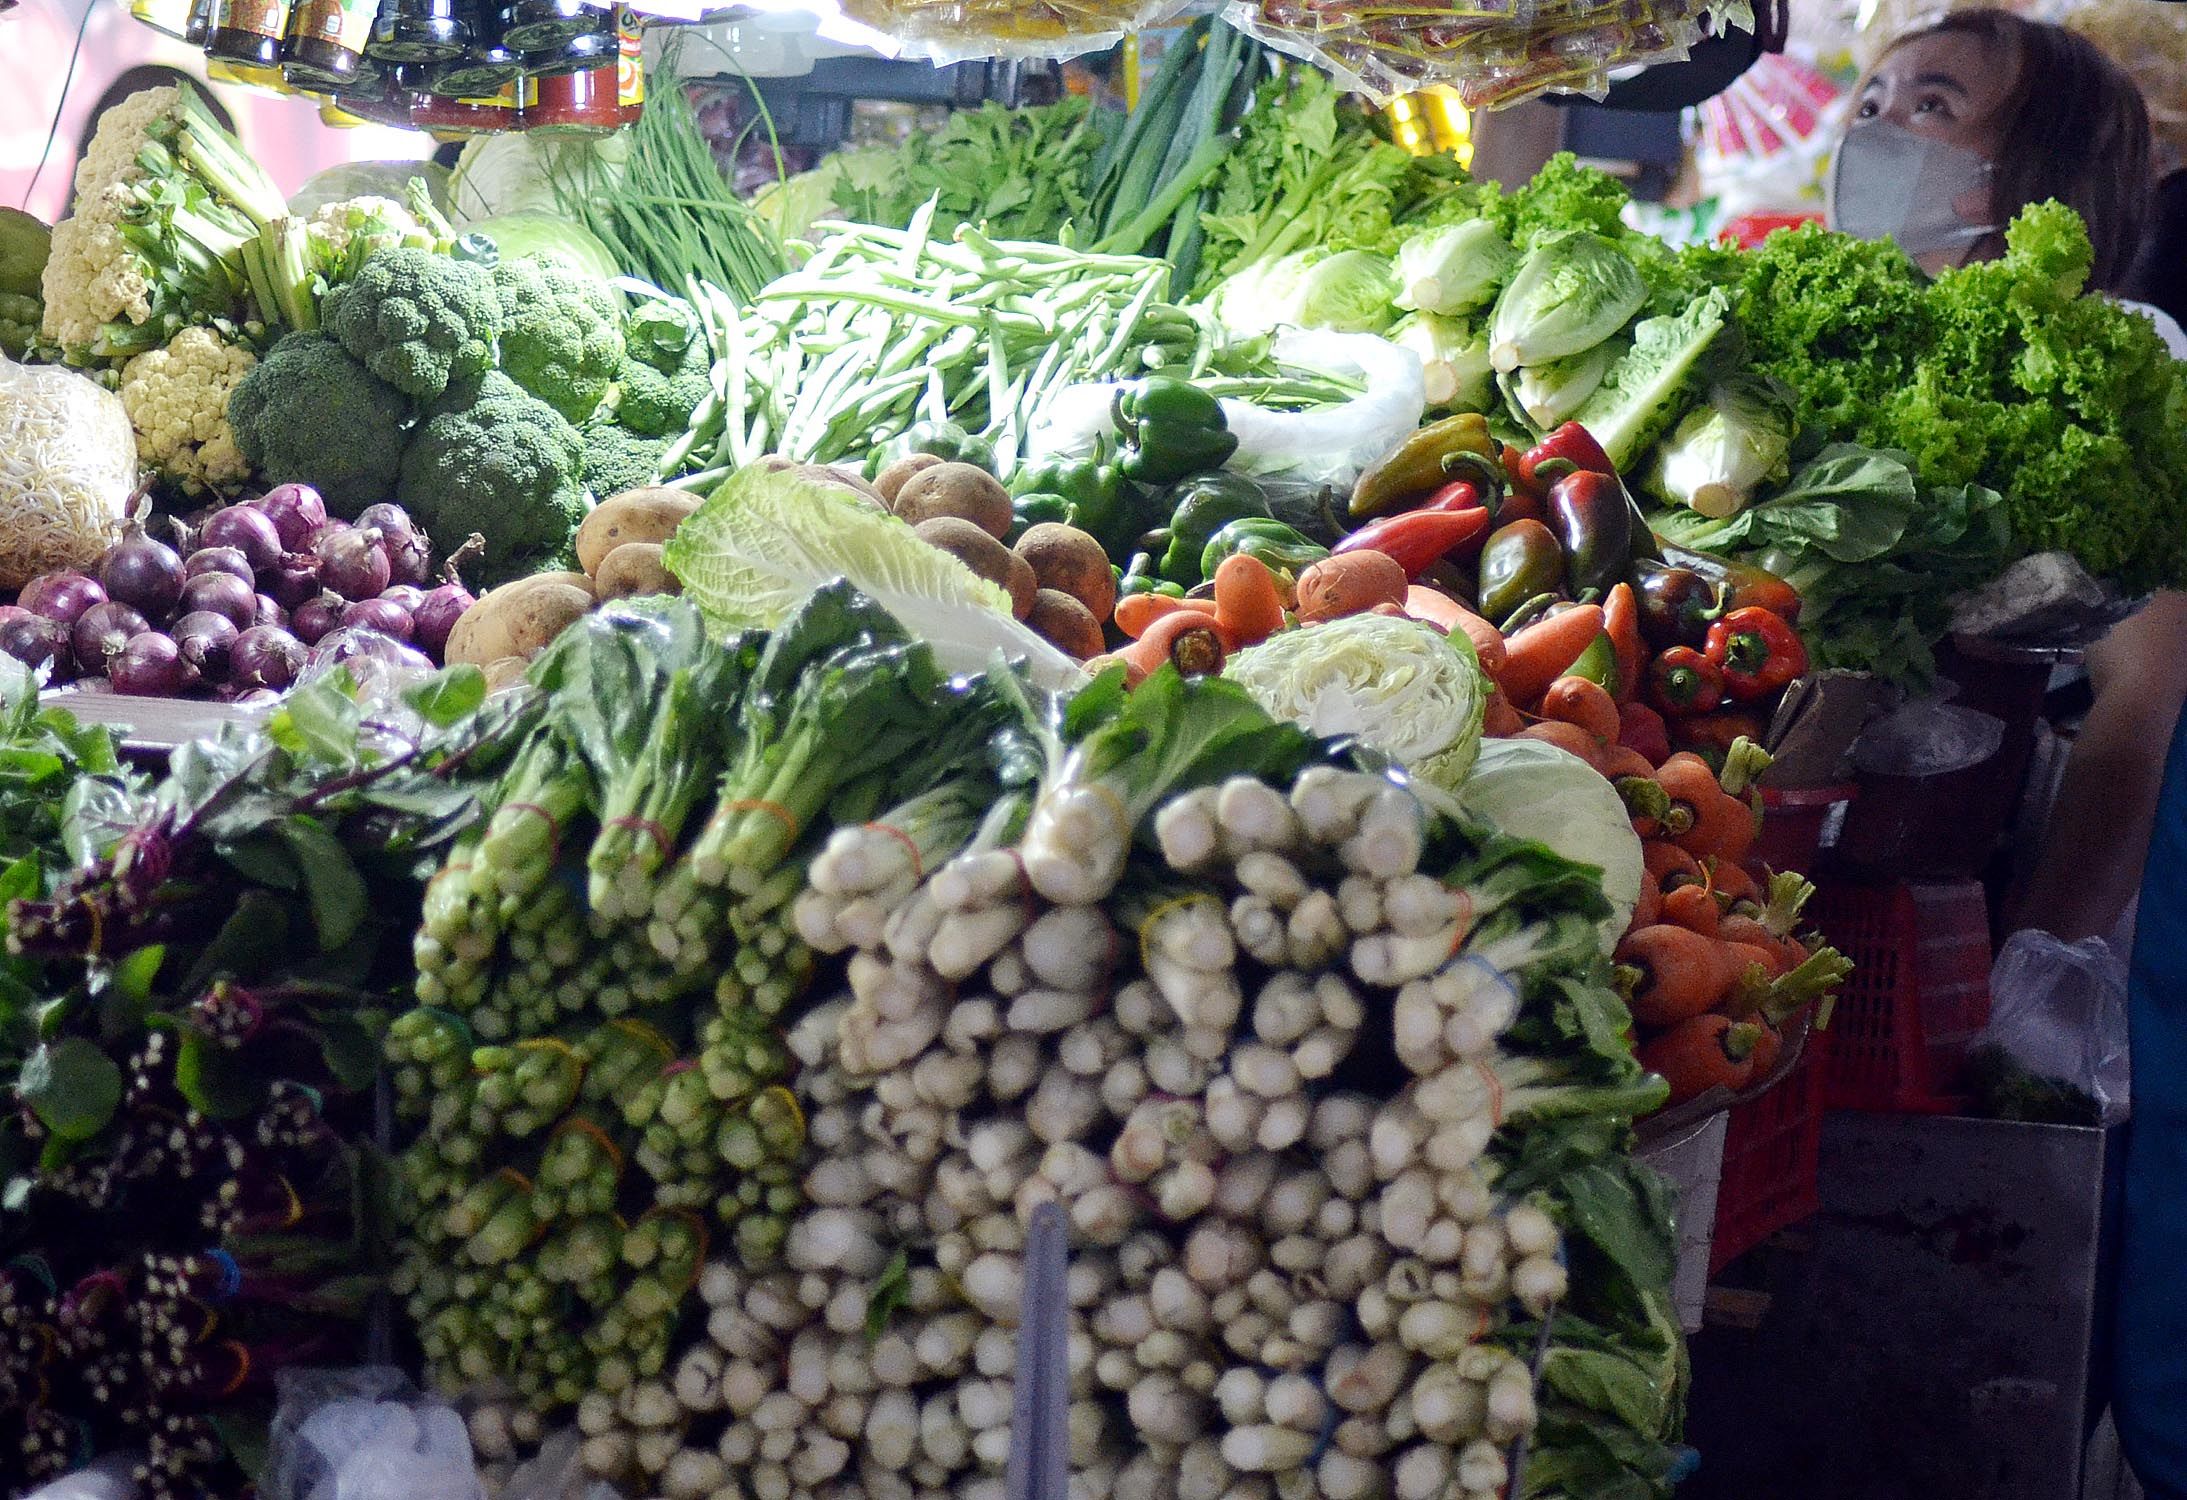 Veggies sold at Libertad public market (Mike Taboy)